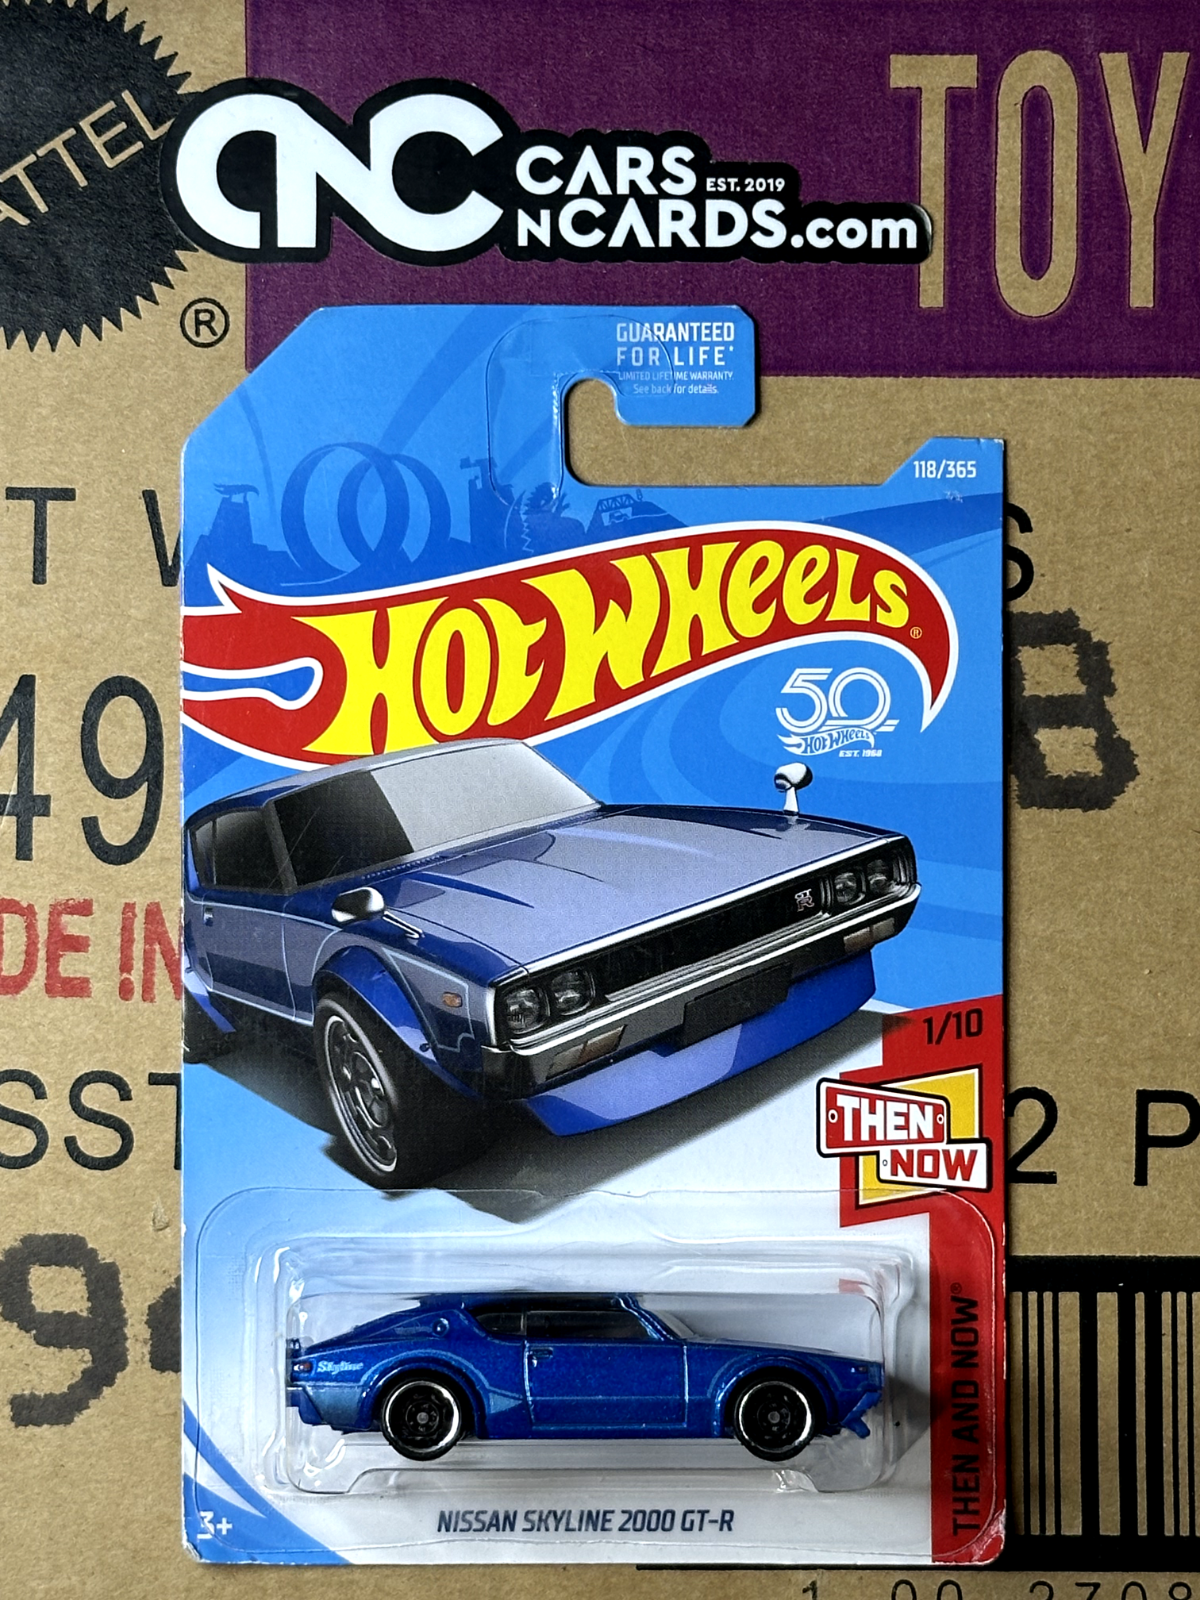 2018 Hot Wheels Then and Now 1/10 Nissan Skyline 2000 GT-R (Card Crease)